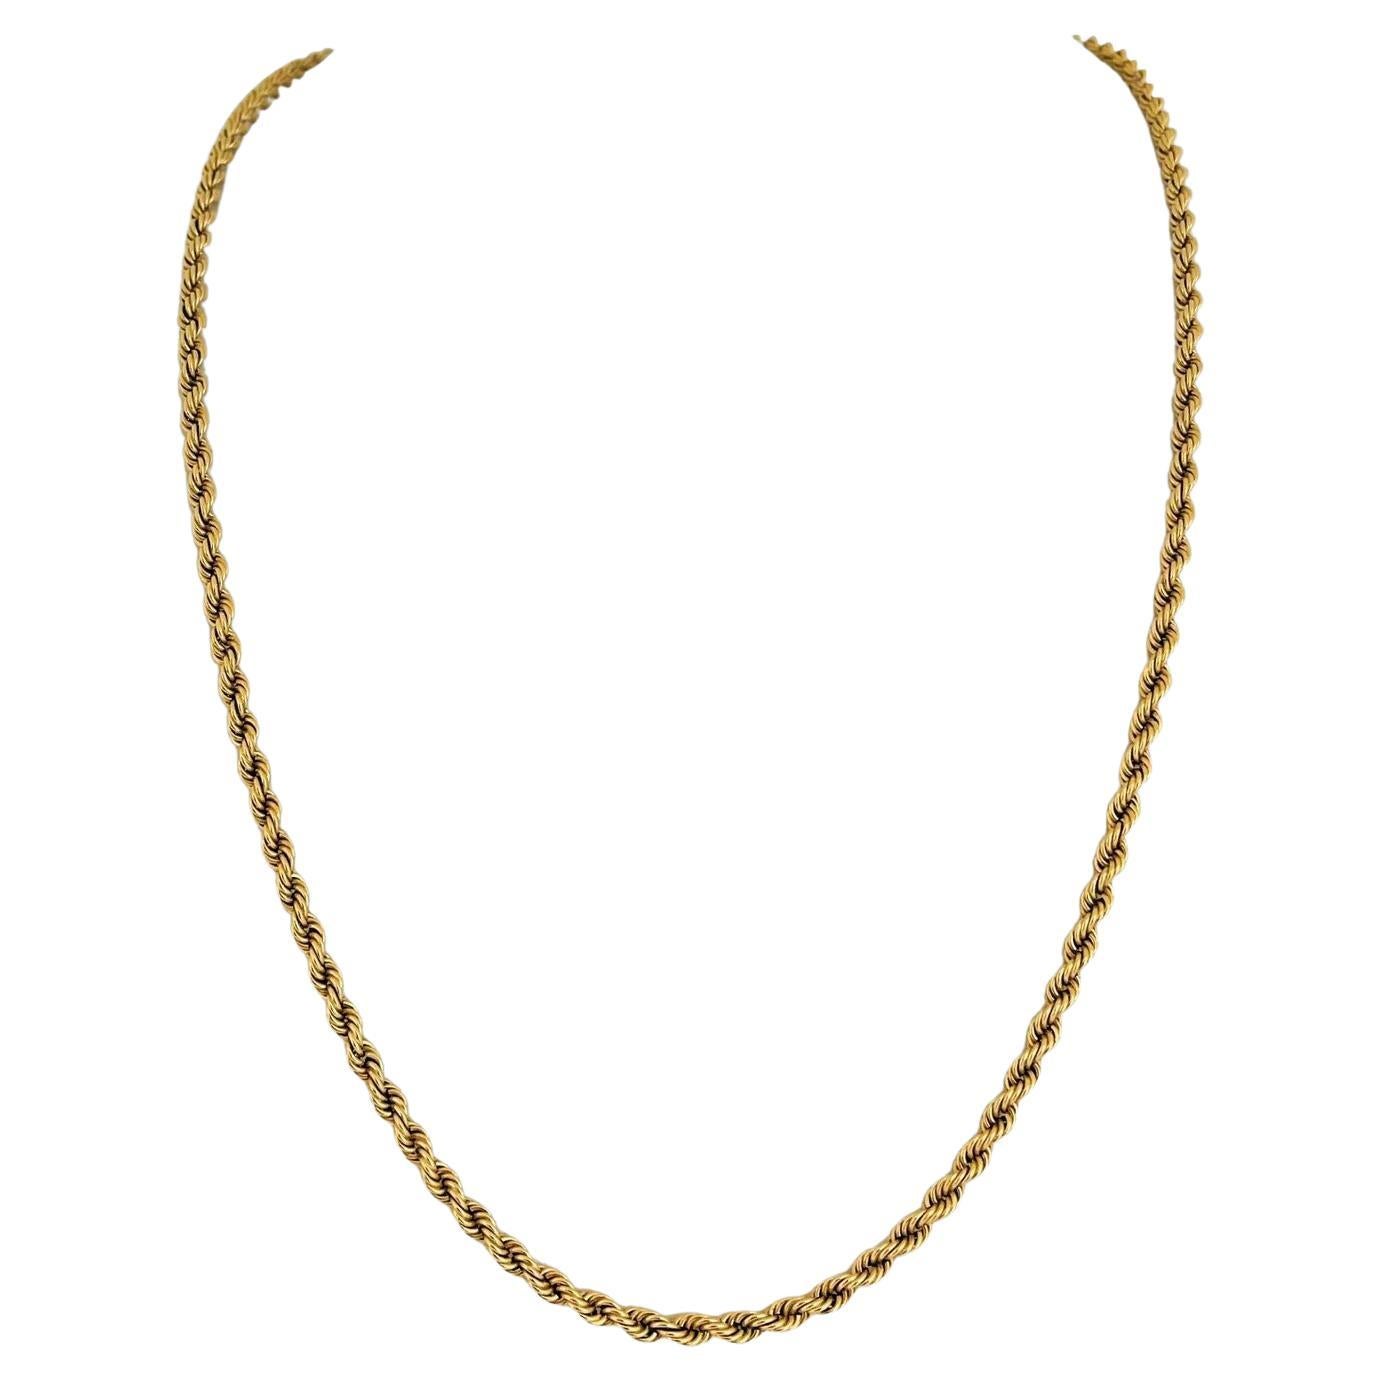 19 Karat Portuguese Yellow Gold Solid Rope Chain Necklace